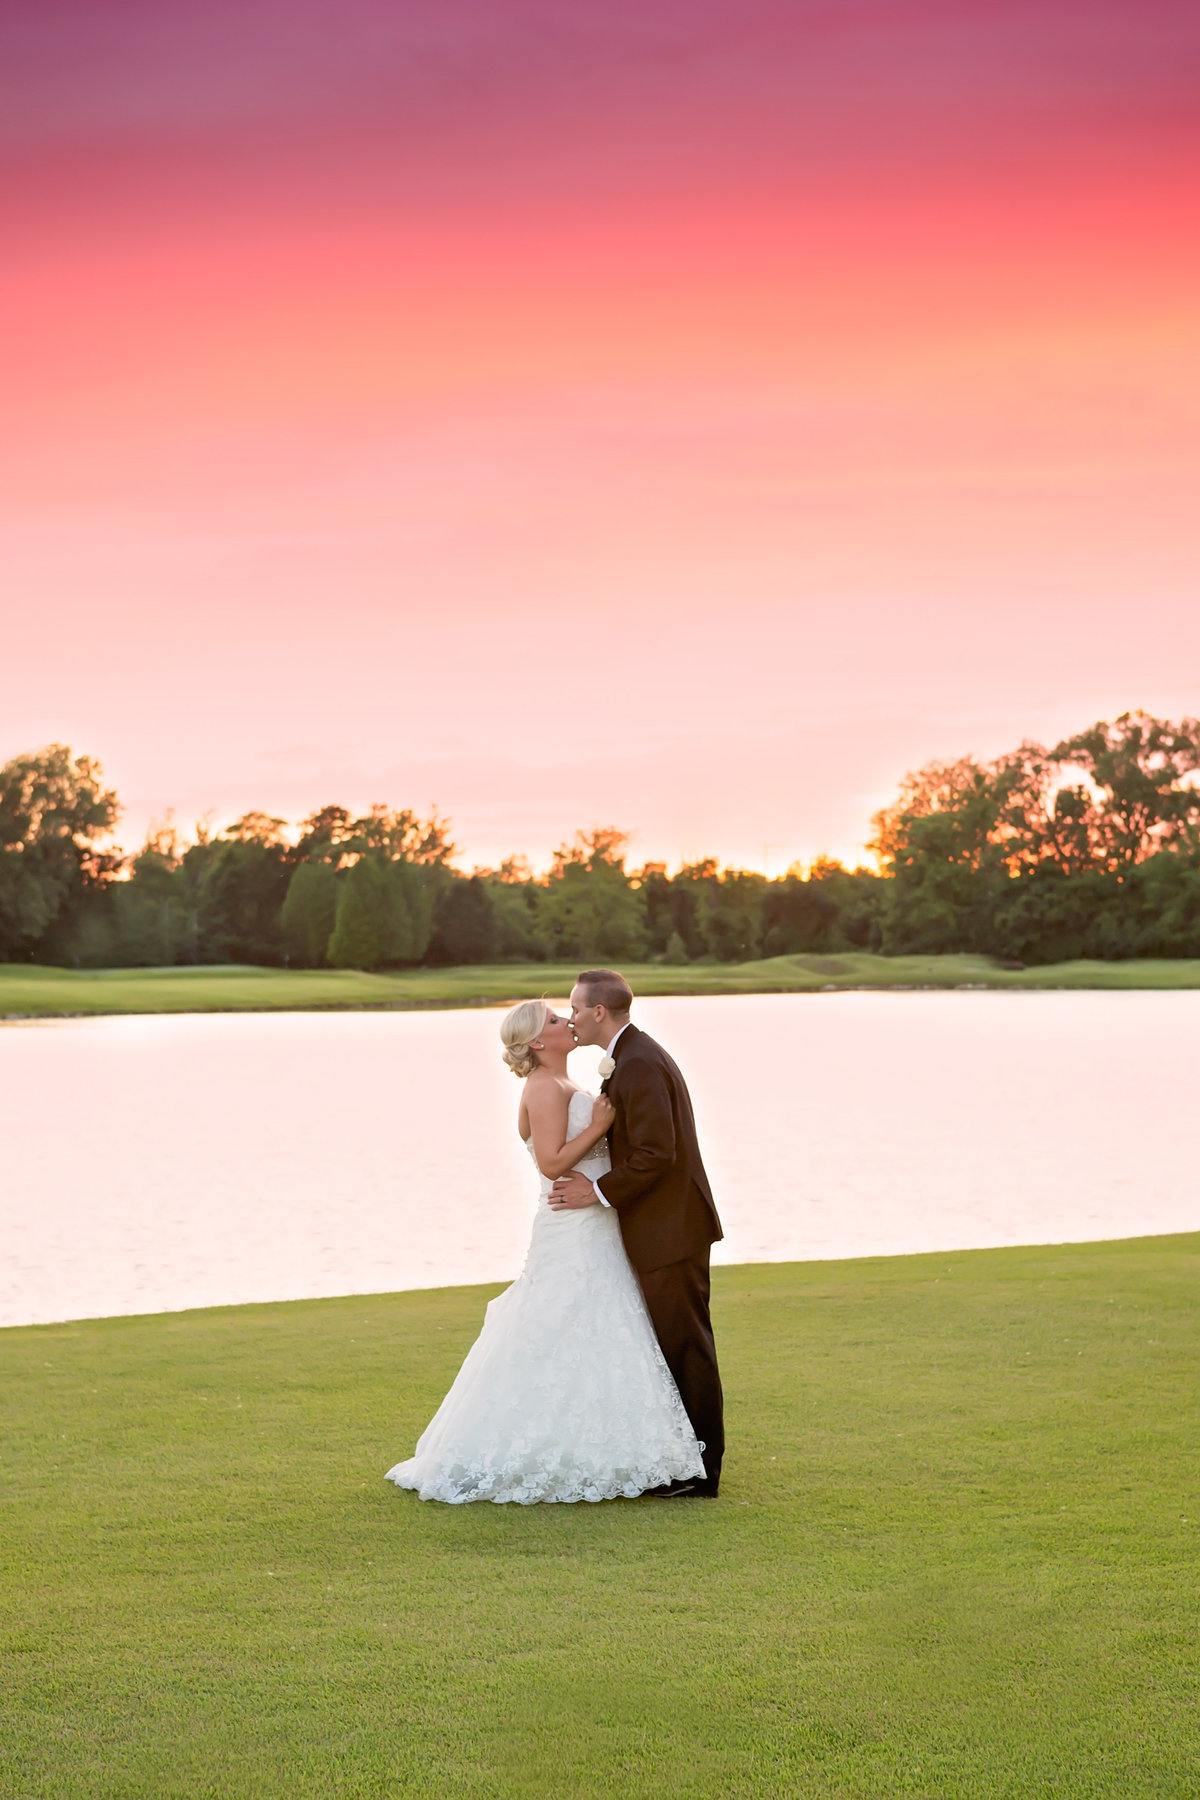 Weddings - Holly Dawn Photography - Wedding Photography - Family Photography - St. Charles - St. Louis - Missouri -115